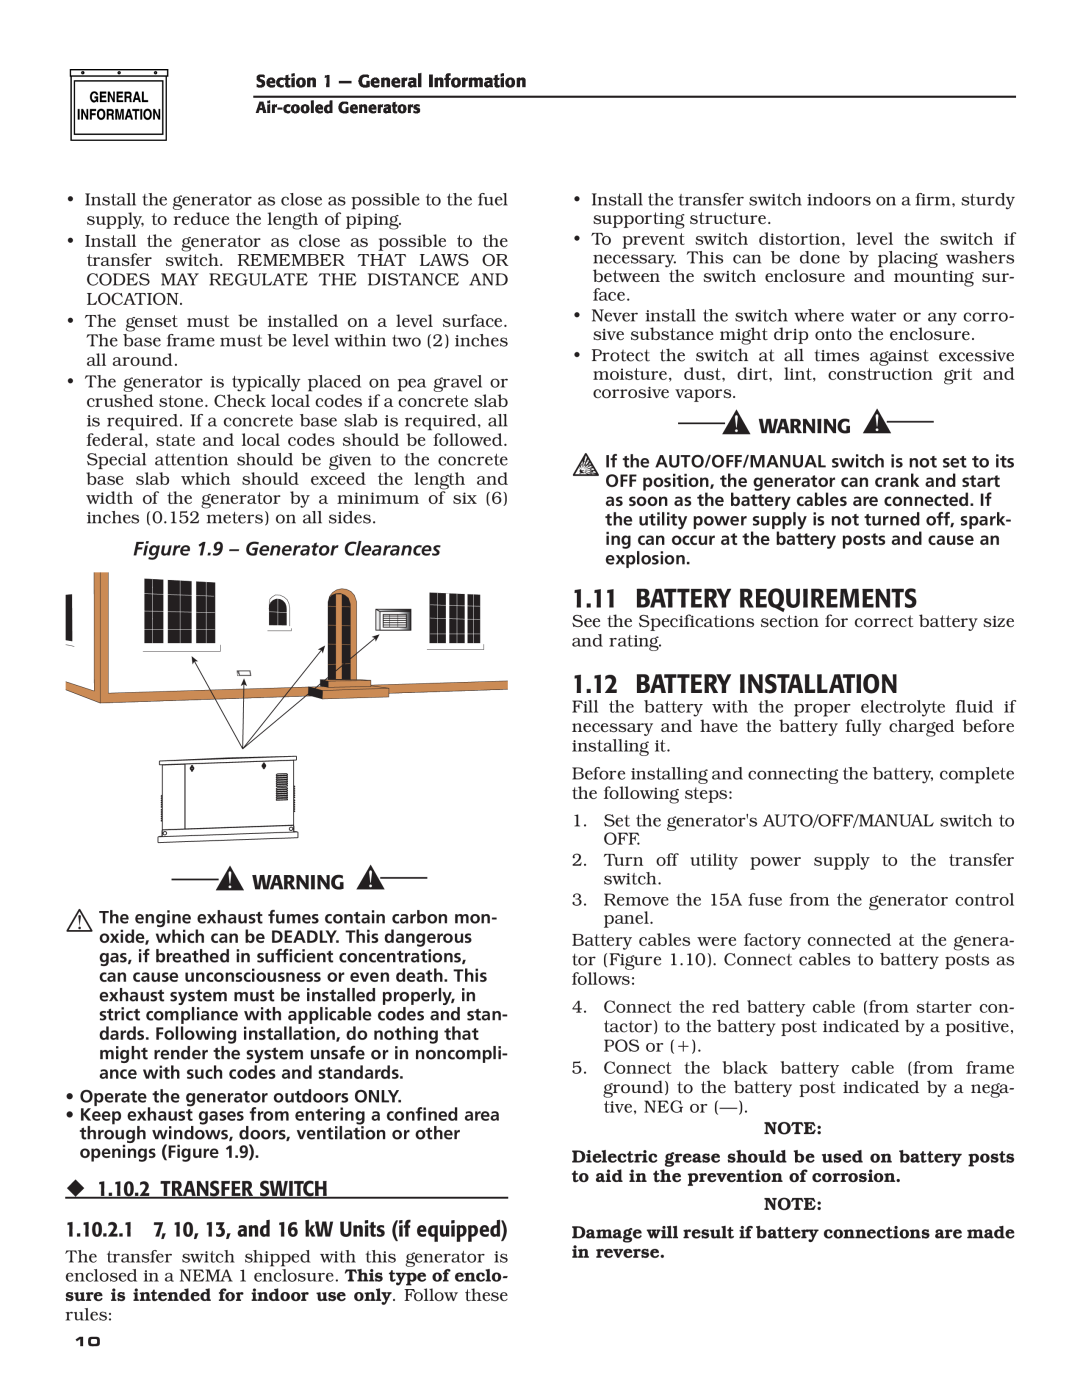 Generac Power Systems 5251 Battery Requirements, Battery Installation, ‹ 1.10.2 TRANSFER SWITCH, 9 - Generator Clearances 